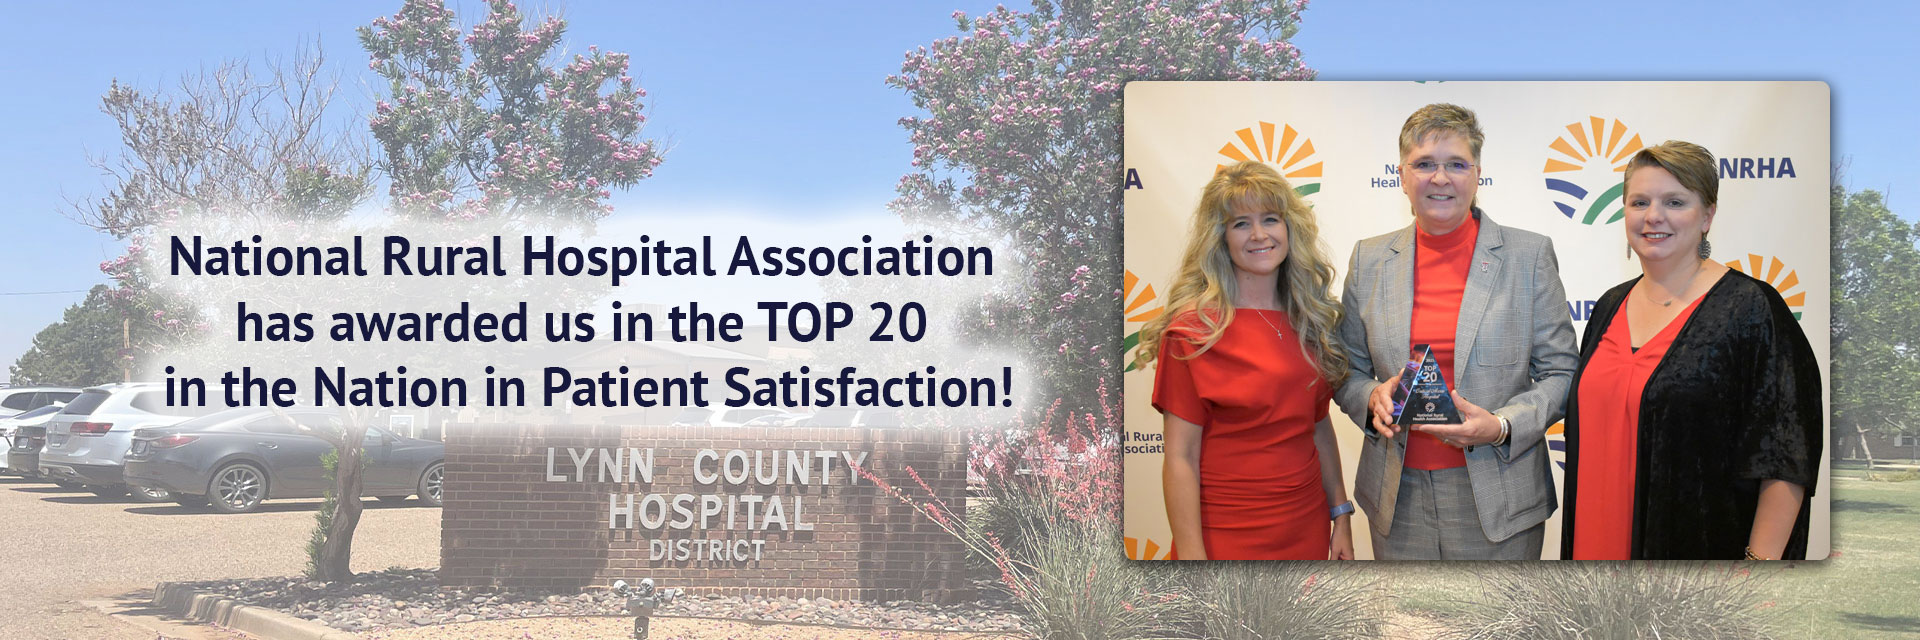 National Rural Hospital Association has awarded us in the TOP 20 in the Nation in Patient Satisfaction!